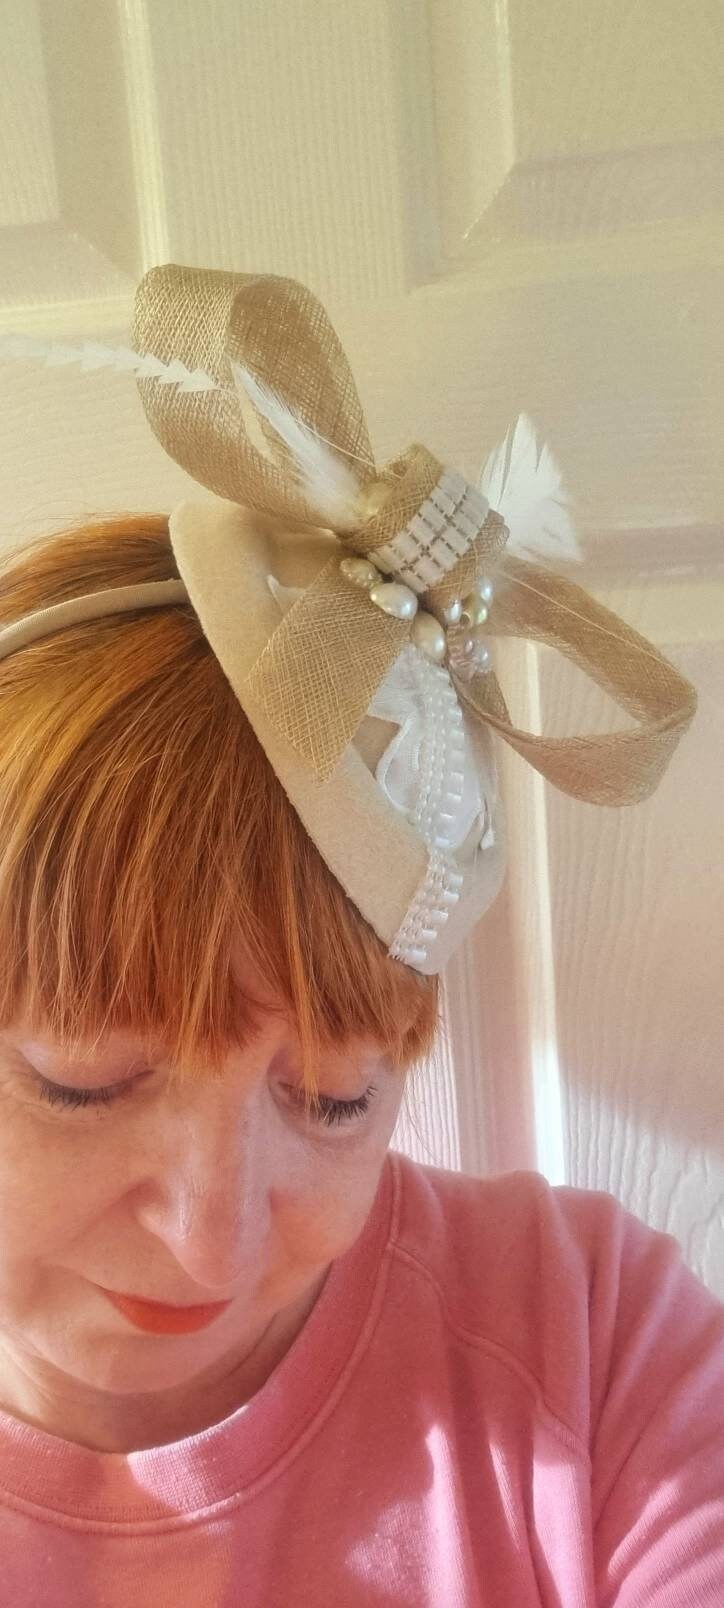 Cream ivory pillbox hat Fascinator wool pearl percher feathers Vintage style occasionwear hatinator races wedding womens accessories